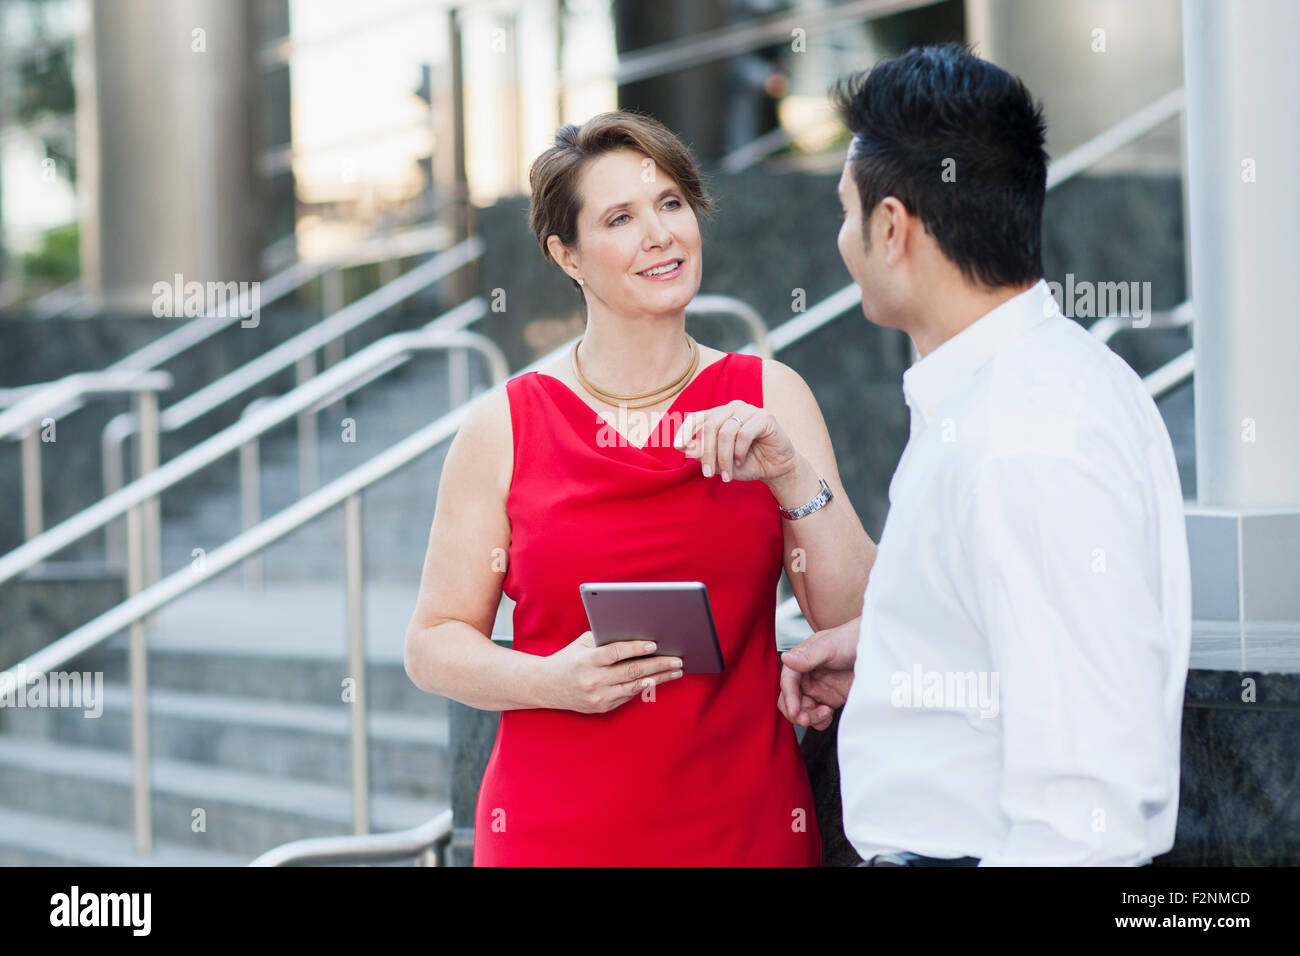 Business people using digital tablet near staircase Stock Photo